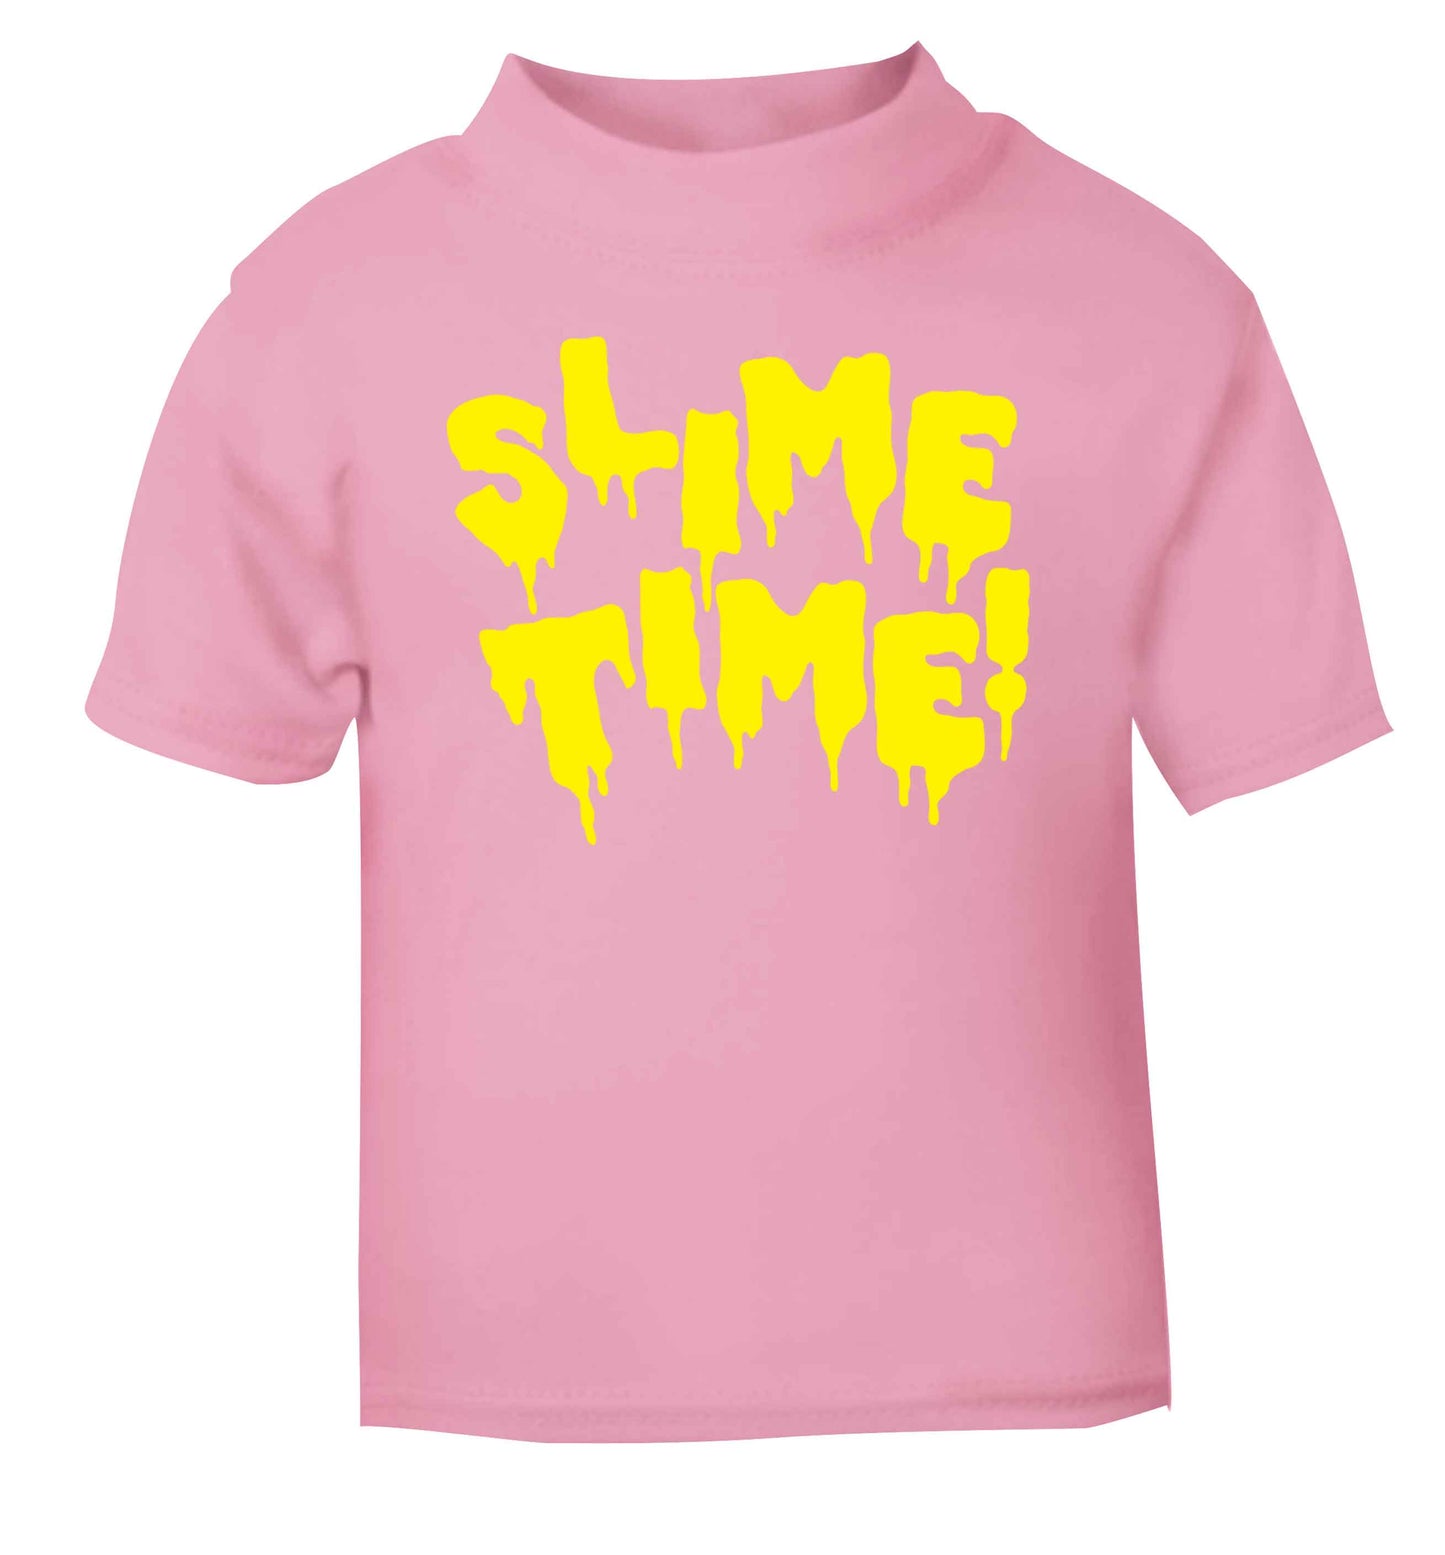 Neon yellow slime time light pink baby toddler Tshirt 2 Years